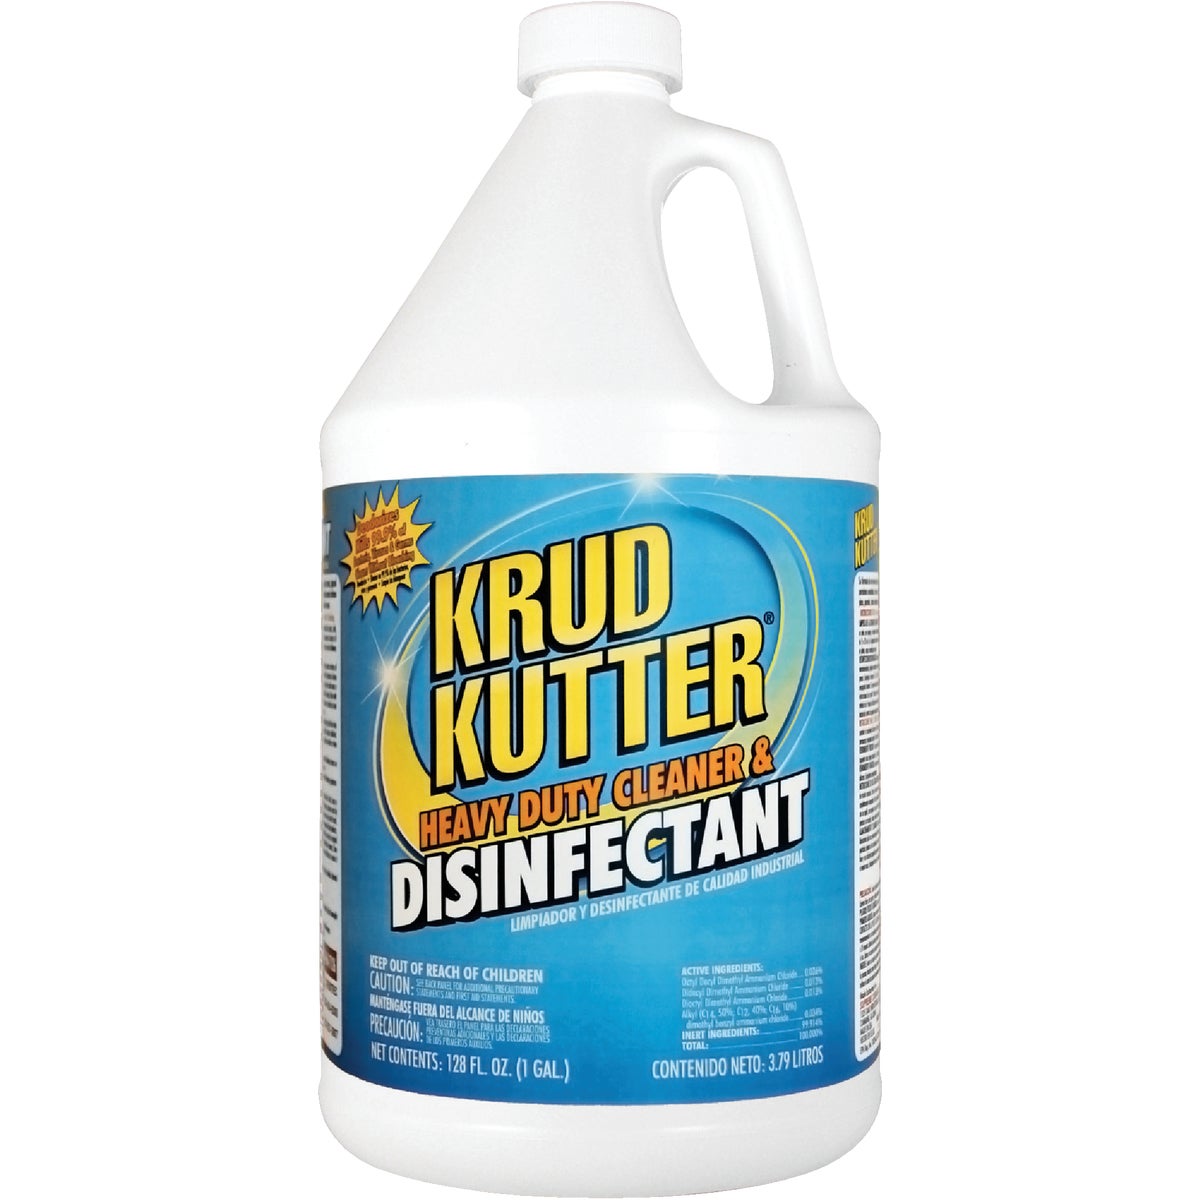 Krud Kutter 1 Gal. Cleaner And Disinfectant